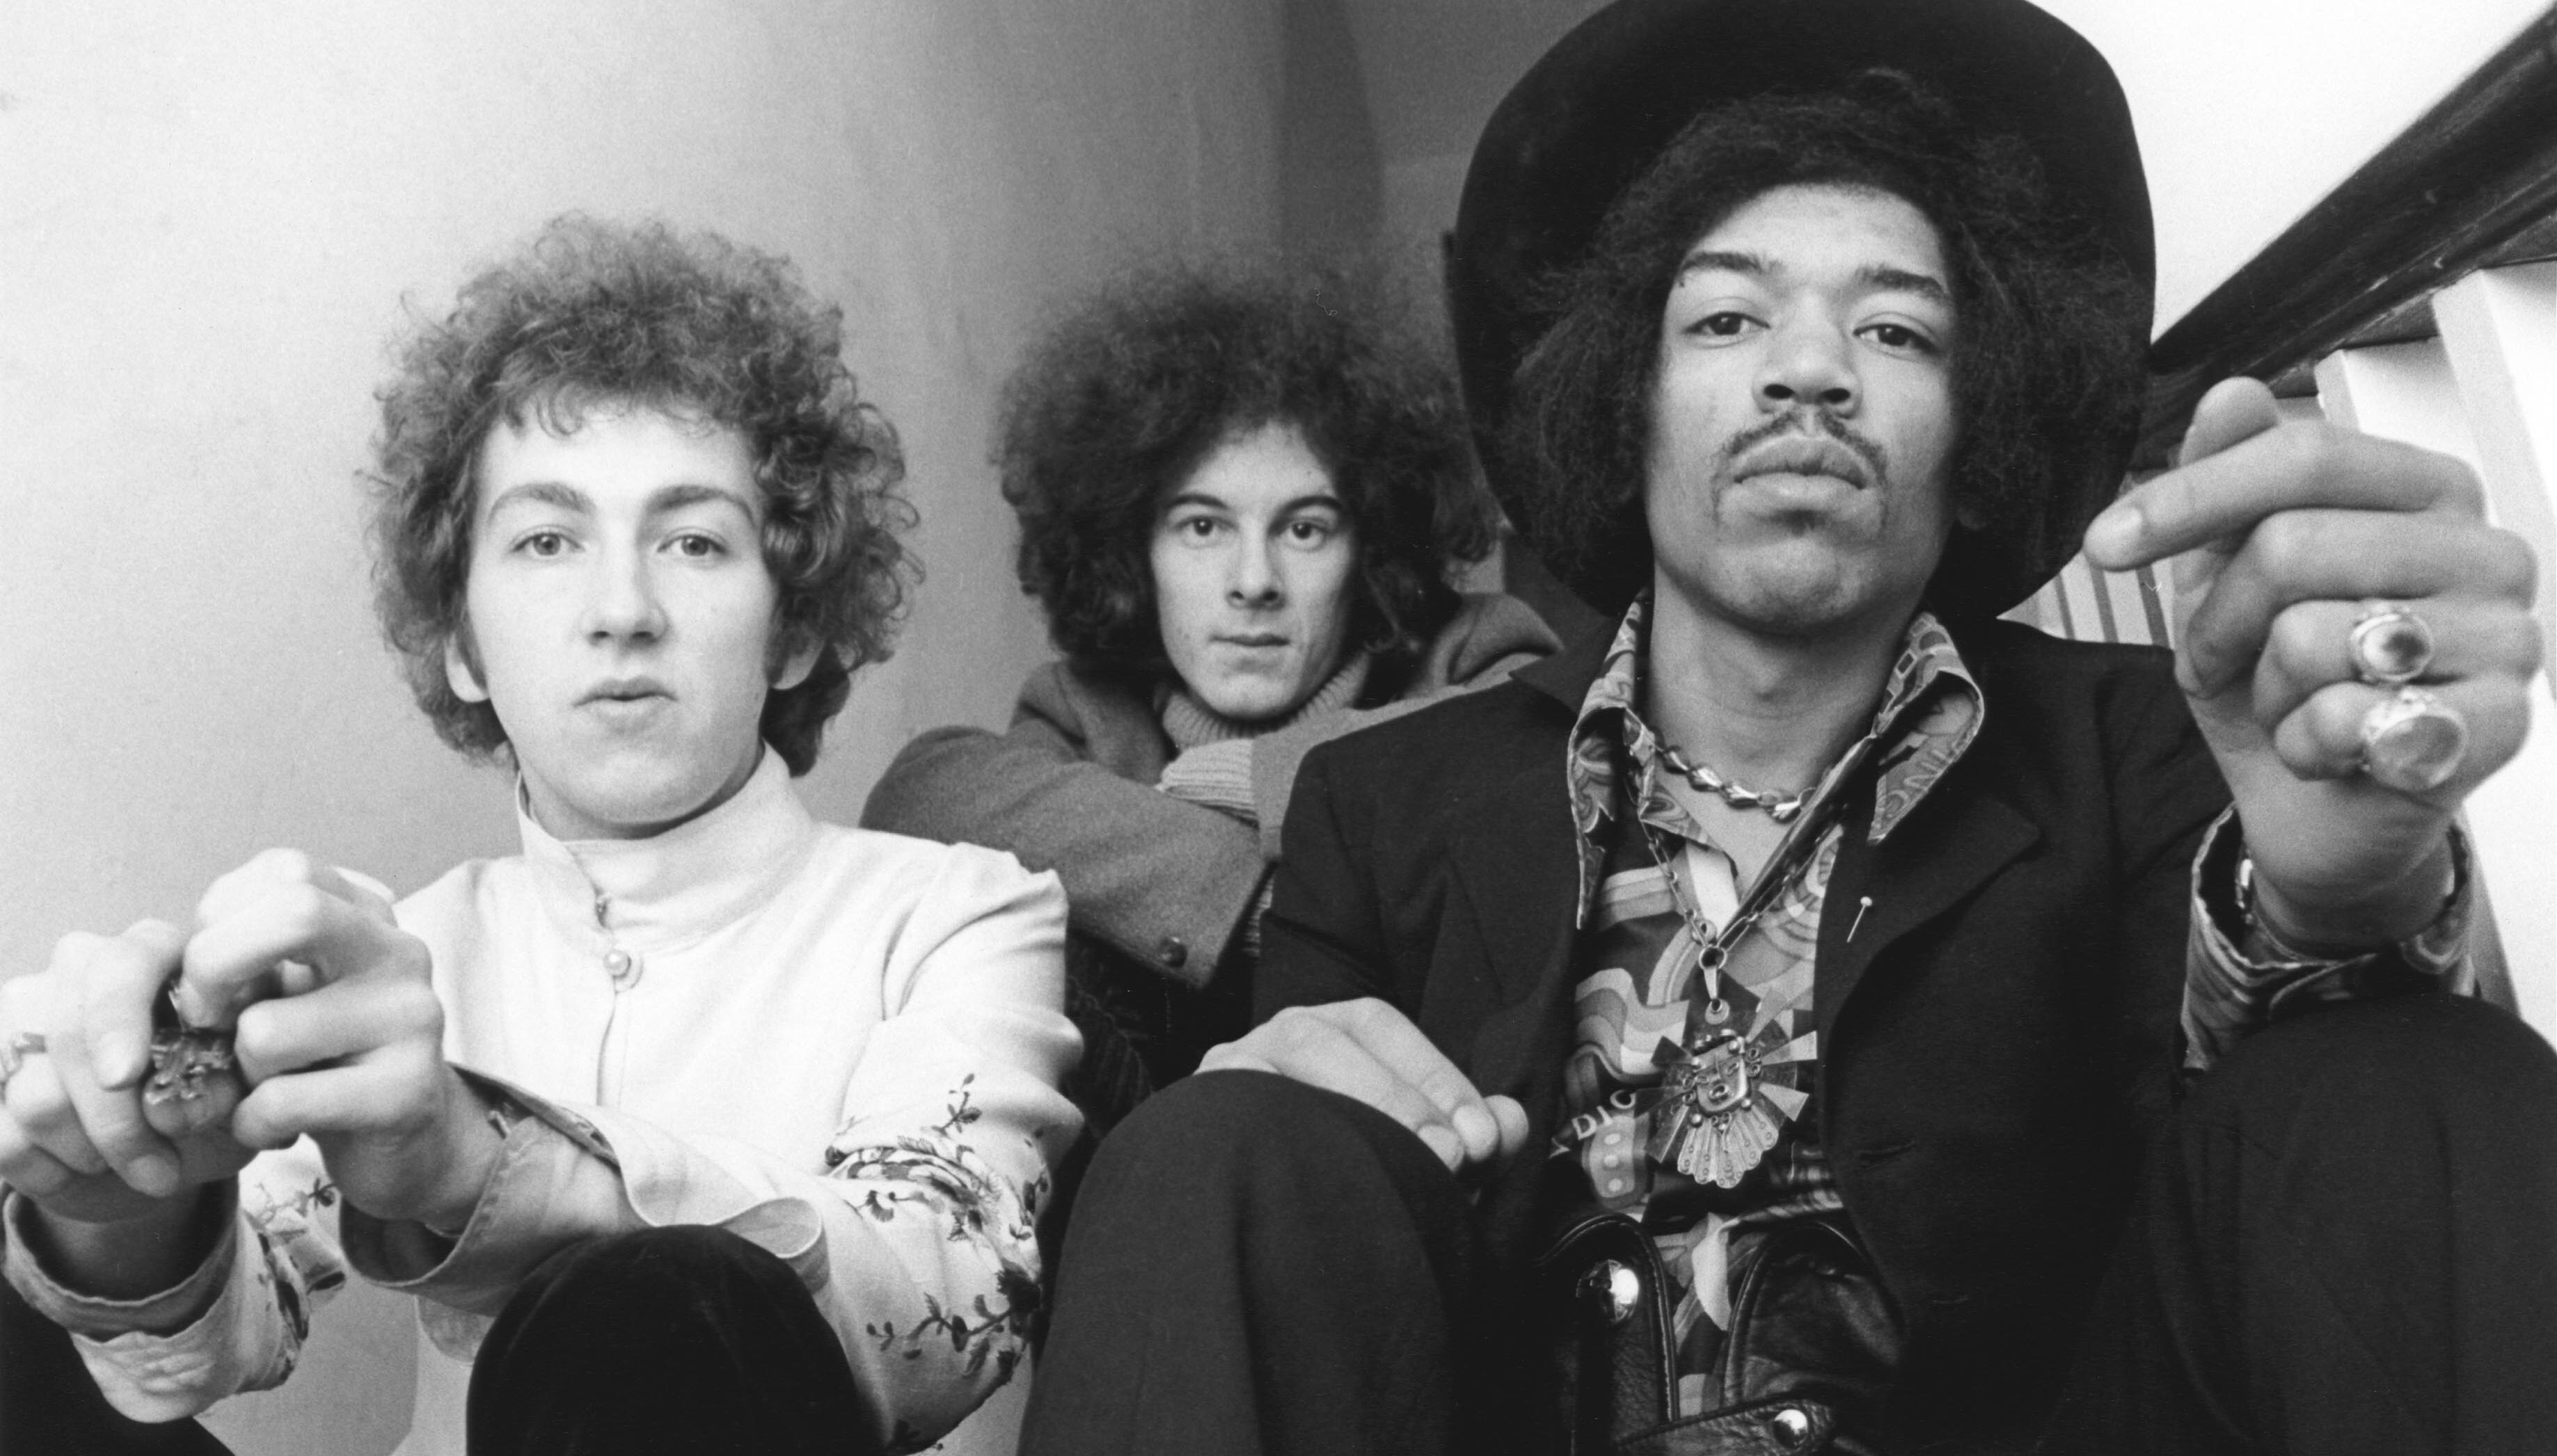 Why The Heirs Of Jimi Hendrix's Bandmates May Have A Case For Royalties